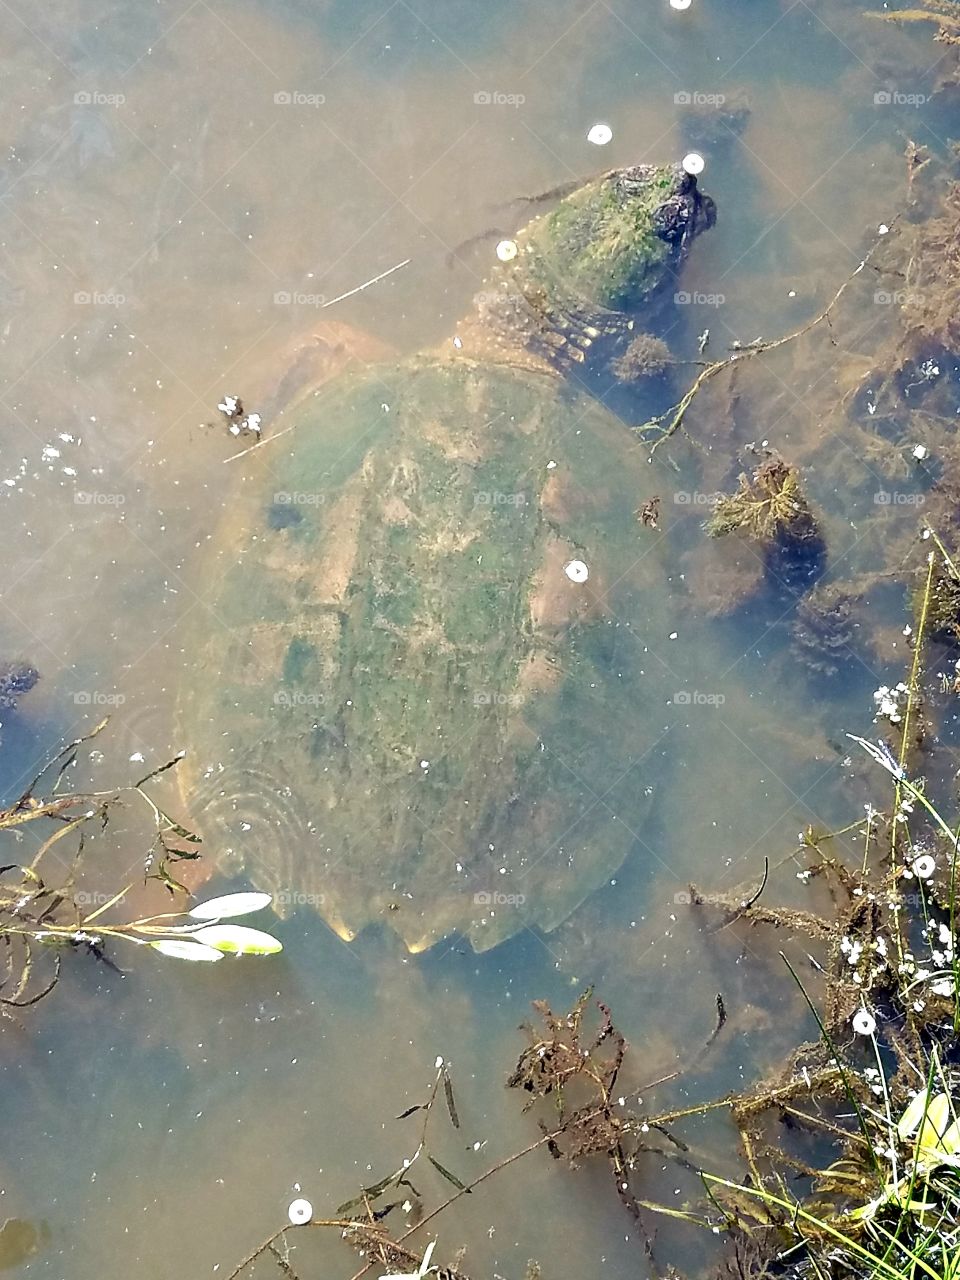 A common Snapping Turtle, grown quite large in a small pond.